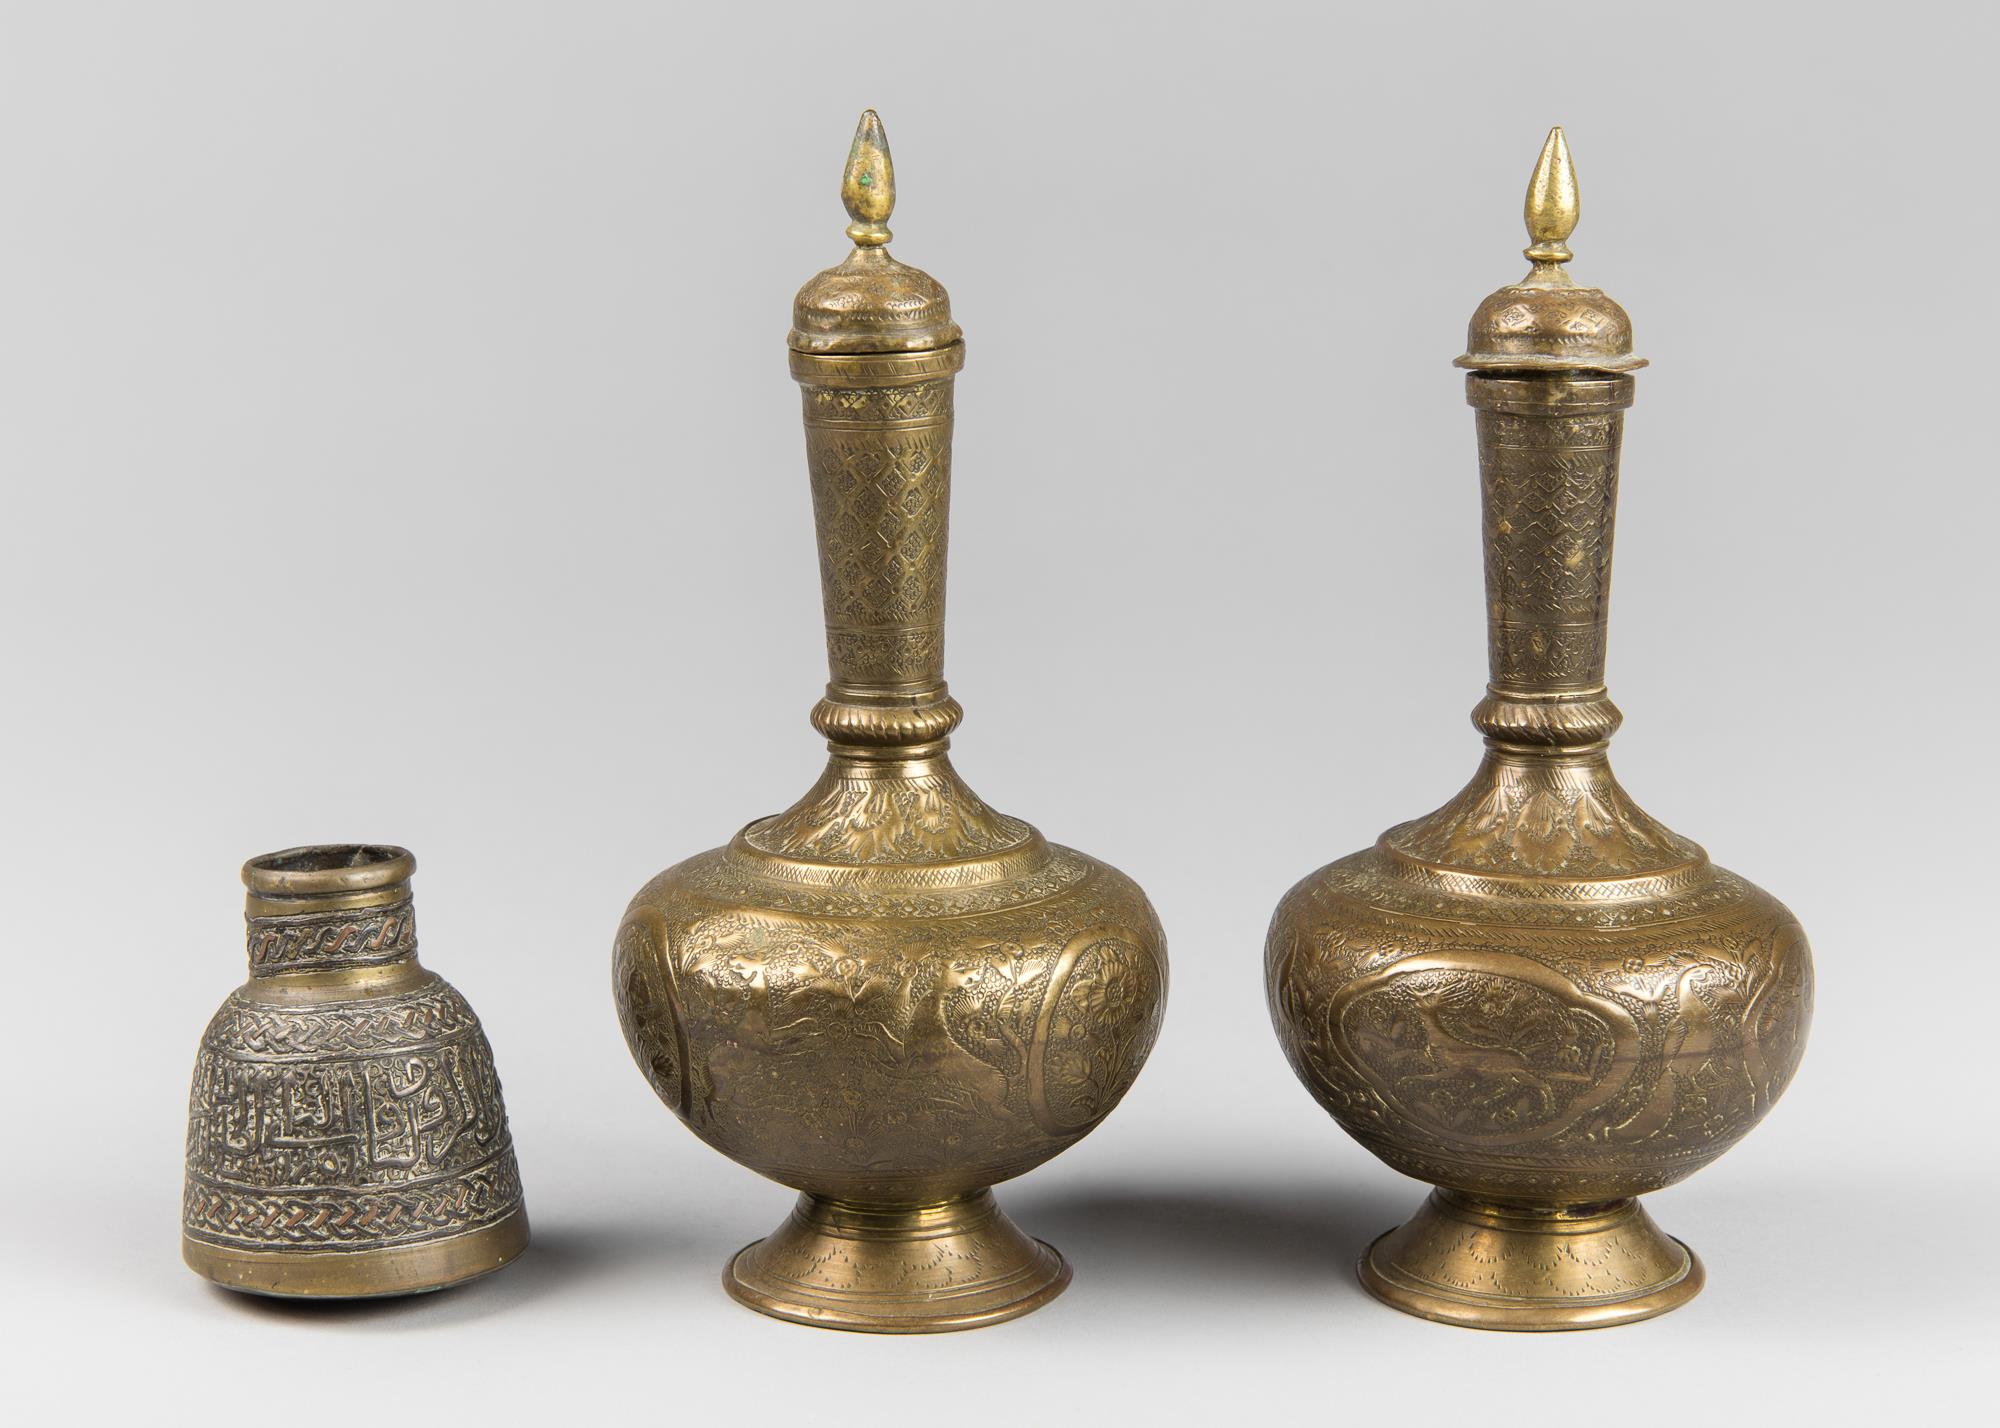 A PAIR OF ANTIQUE INDIAN ENGRAVED BRASS LIDDED SURAHI WATER VESSELS AND AN ANTIQUE PERSIAN